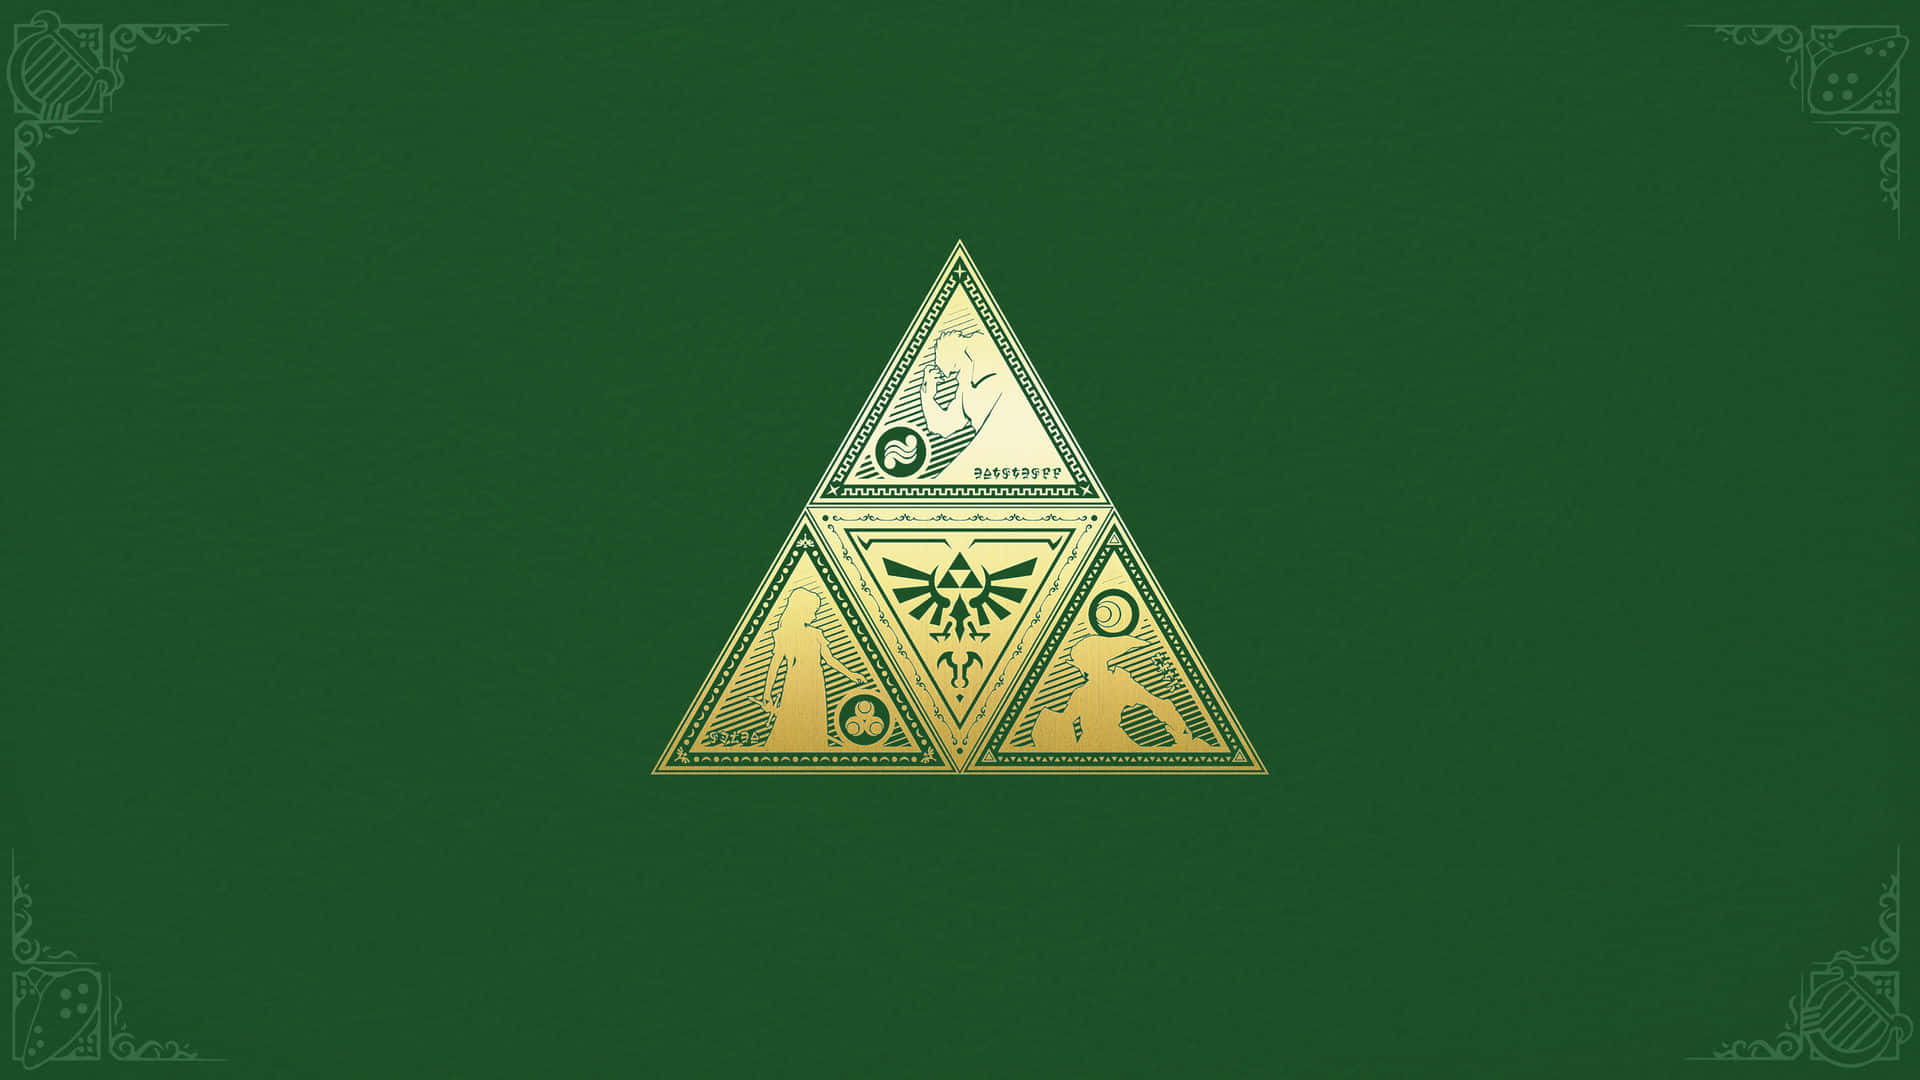 Follow The Path Of The Triforce